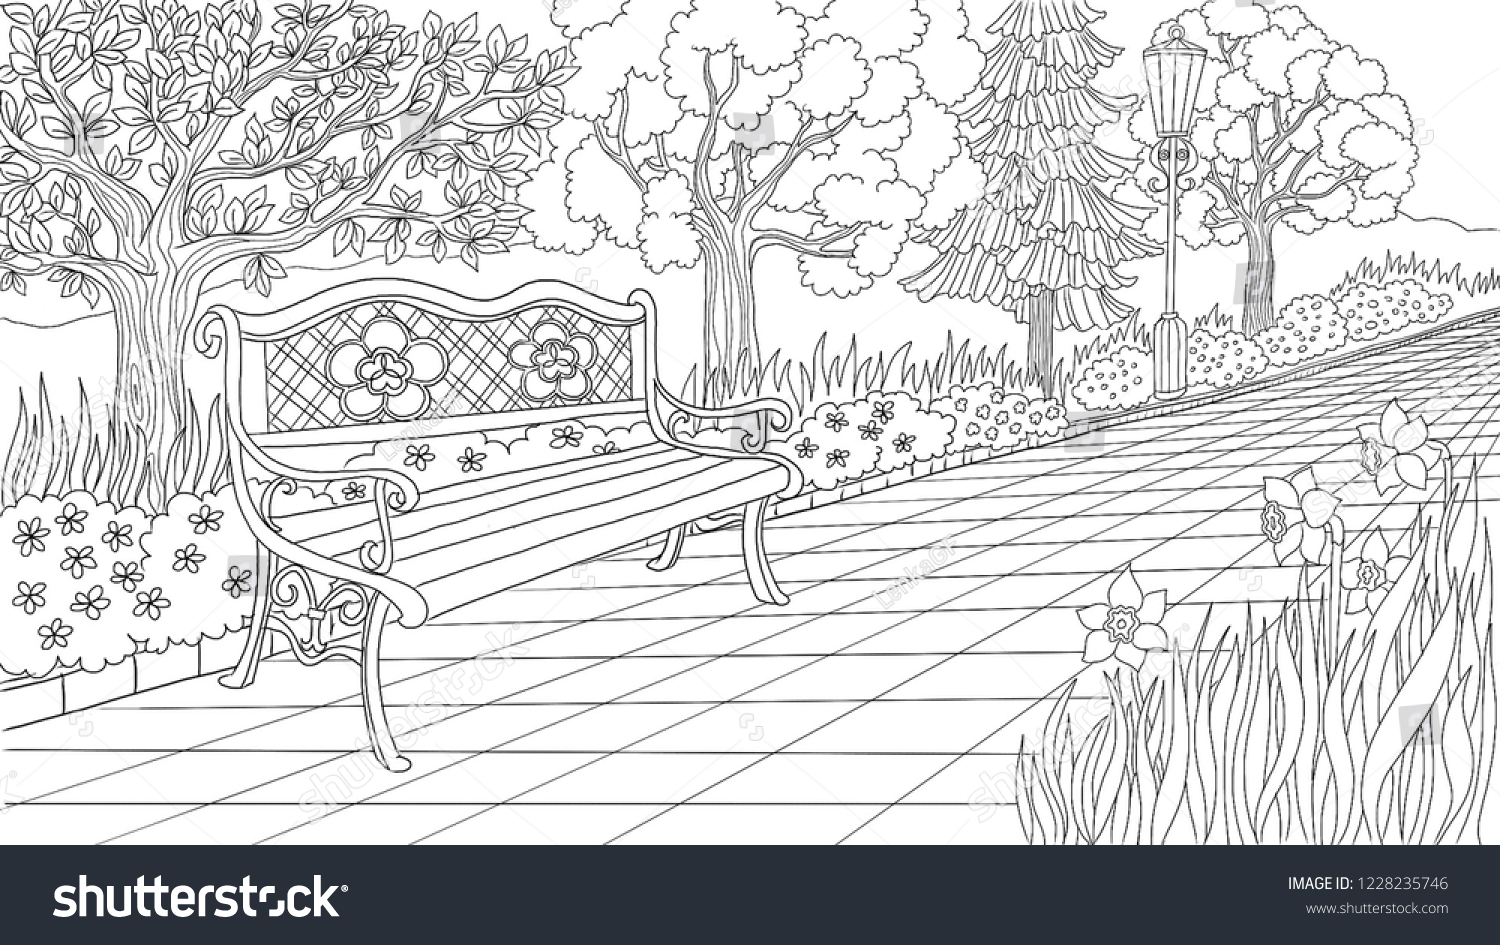 Garden coloring pages Images, Stock Photos & Vectors   Shutterstock